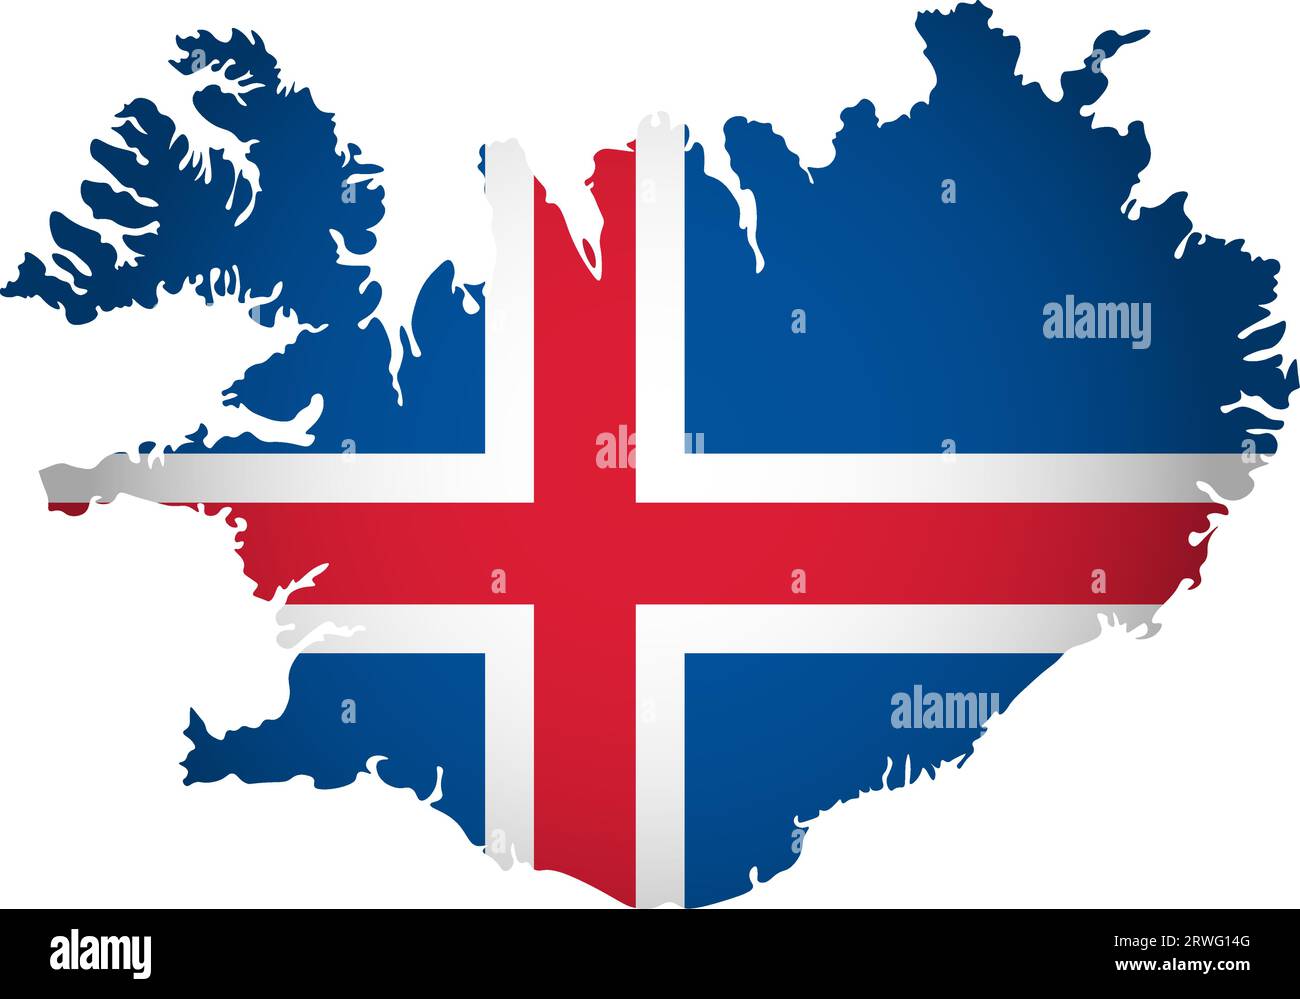 Illustration with Icelandic national flag with simplified  shape of Iceland map (jpg). Volume shadow on the map Stock Vector